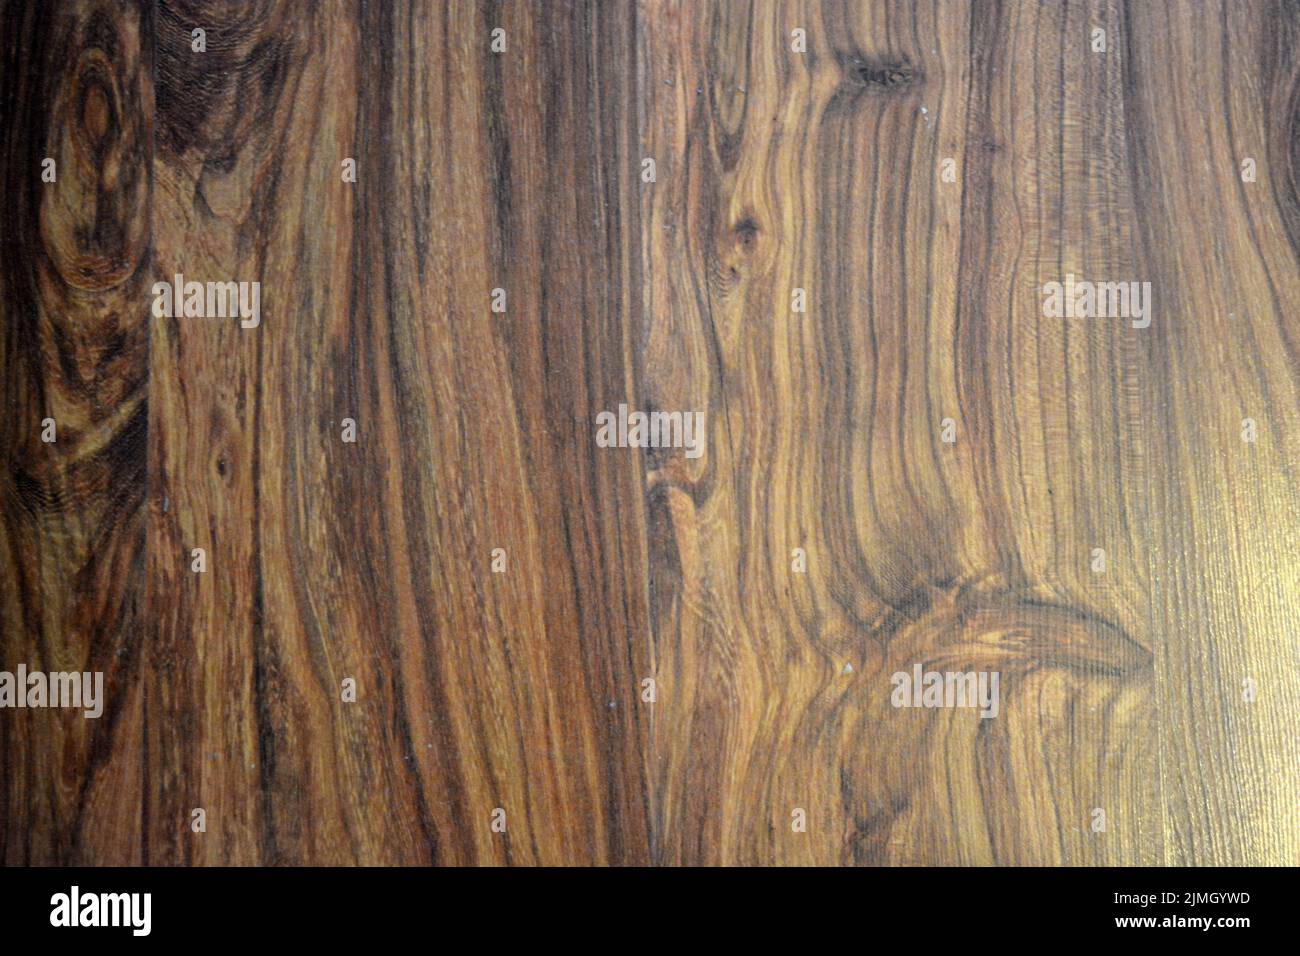 Interesting and intriguing wooden background with an pattern, textured lines. Stock Photo